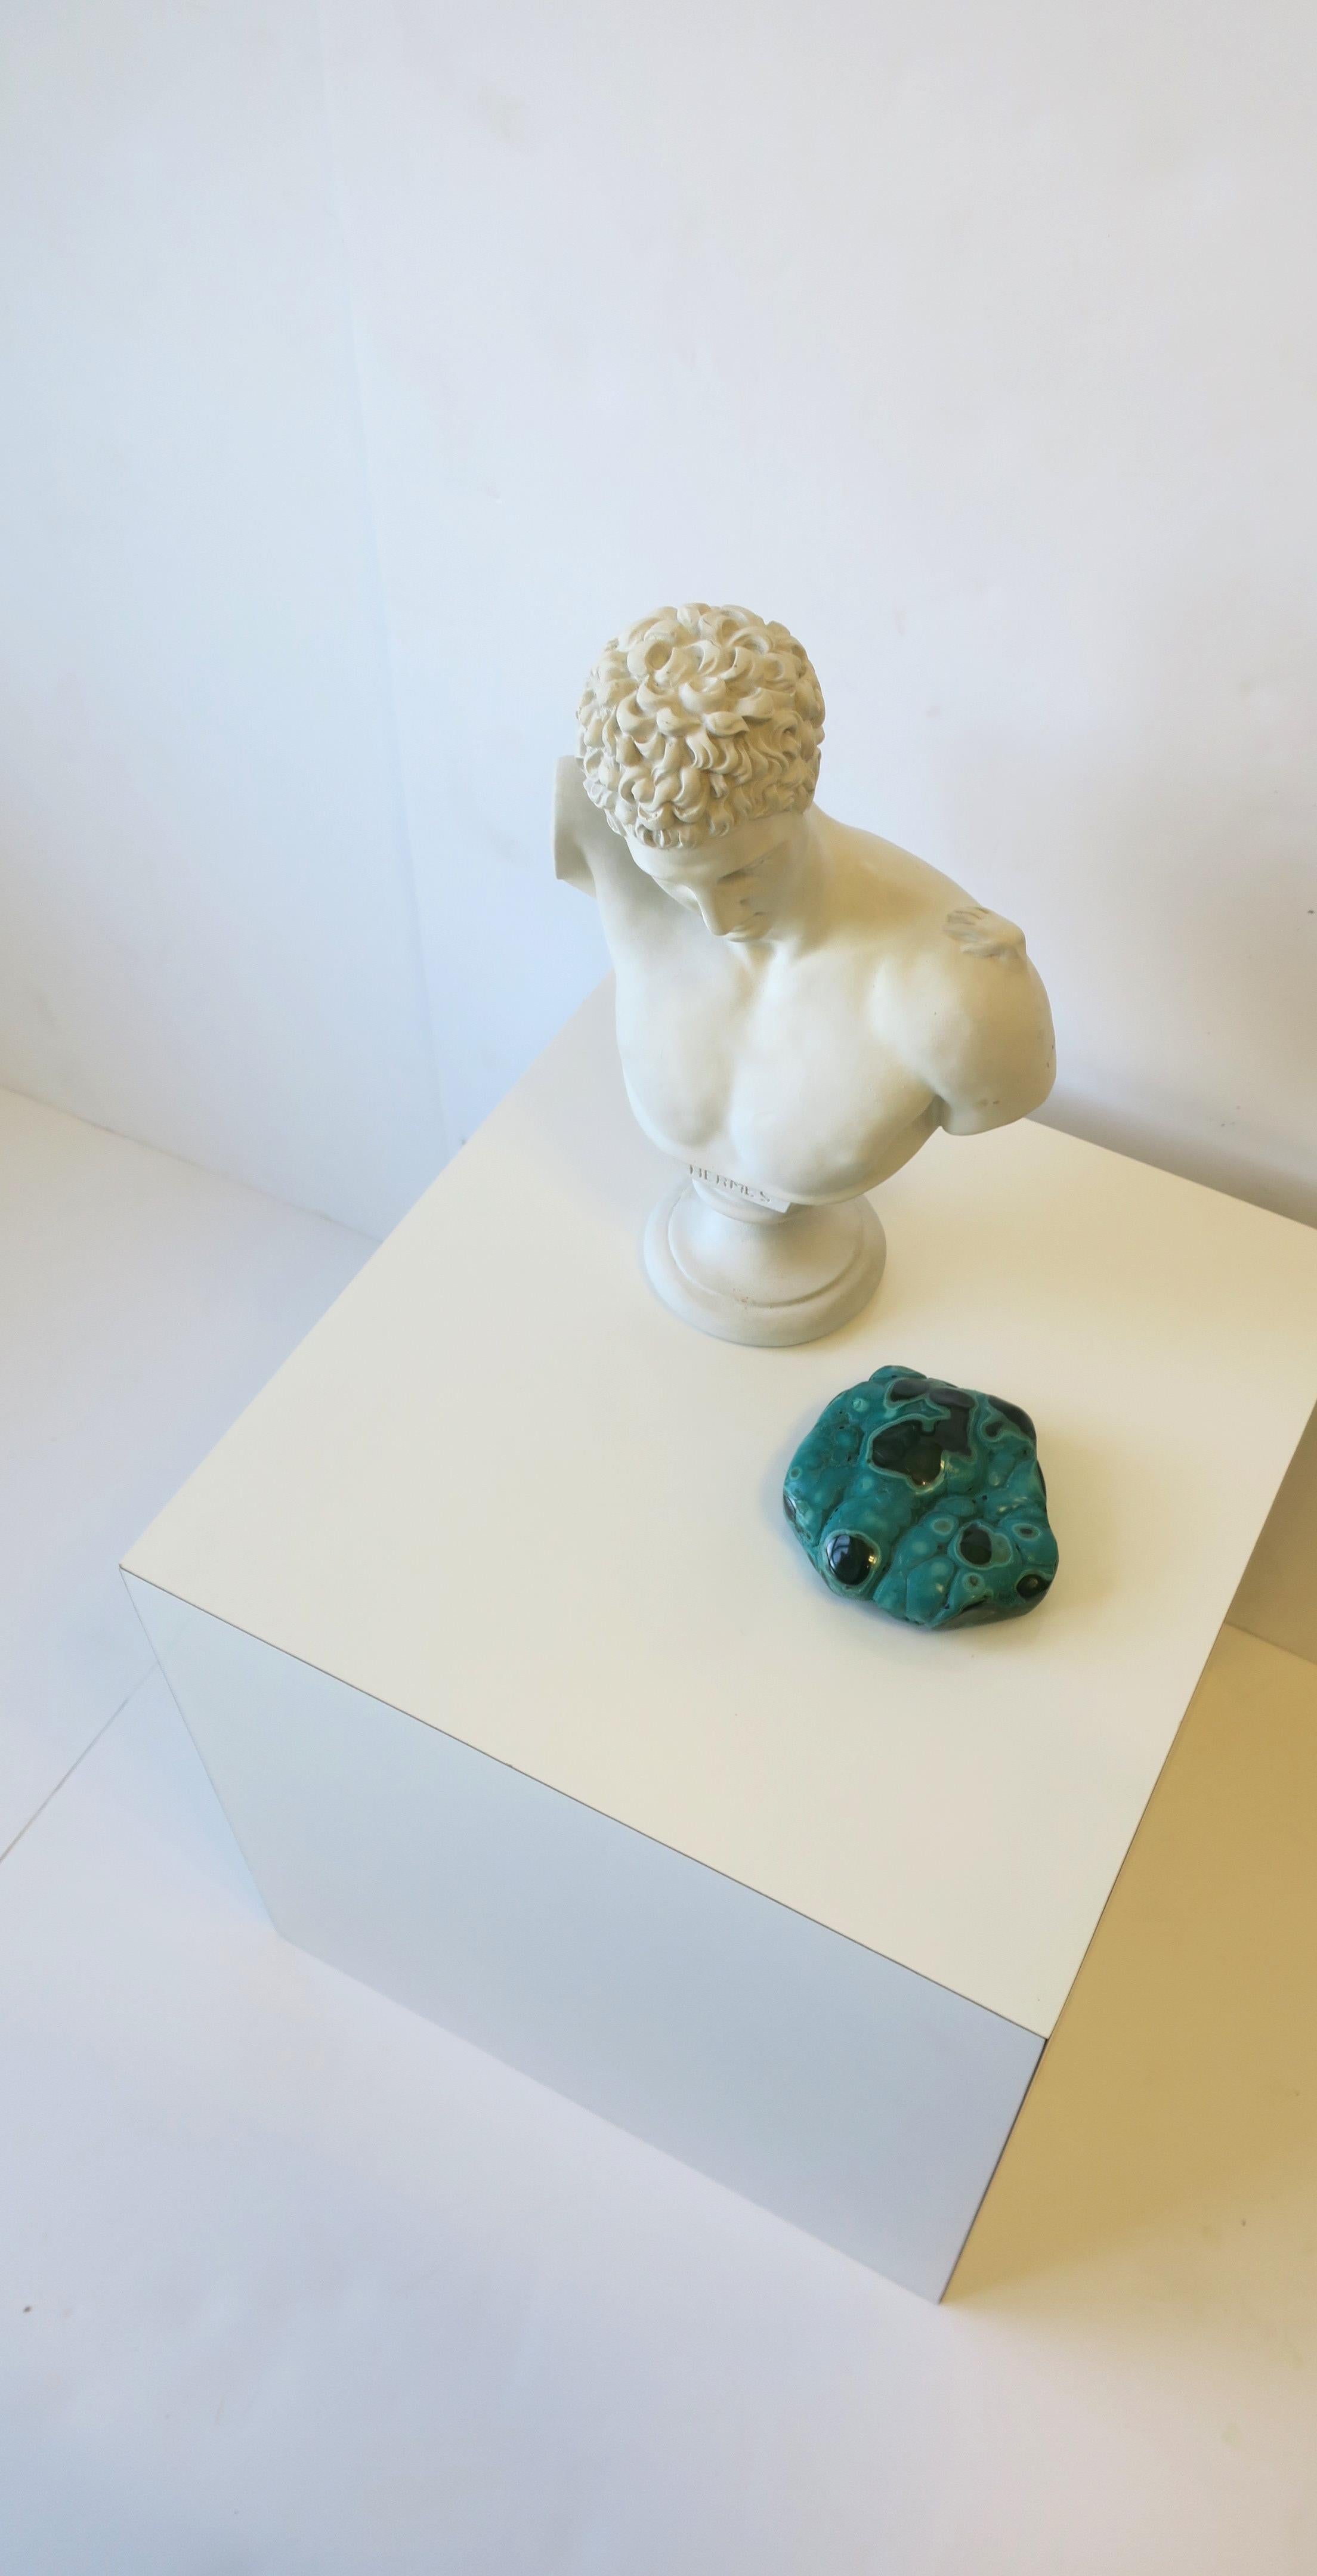 Green Malachite Paperweight or Decorative Object In Good Condition For Sale In New York, NY